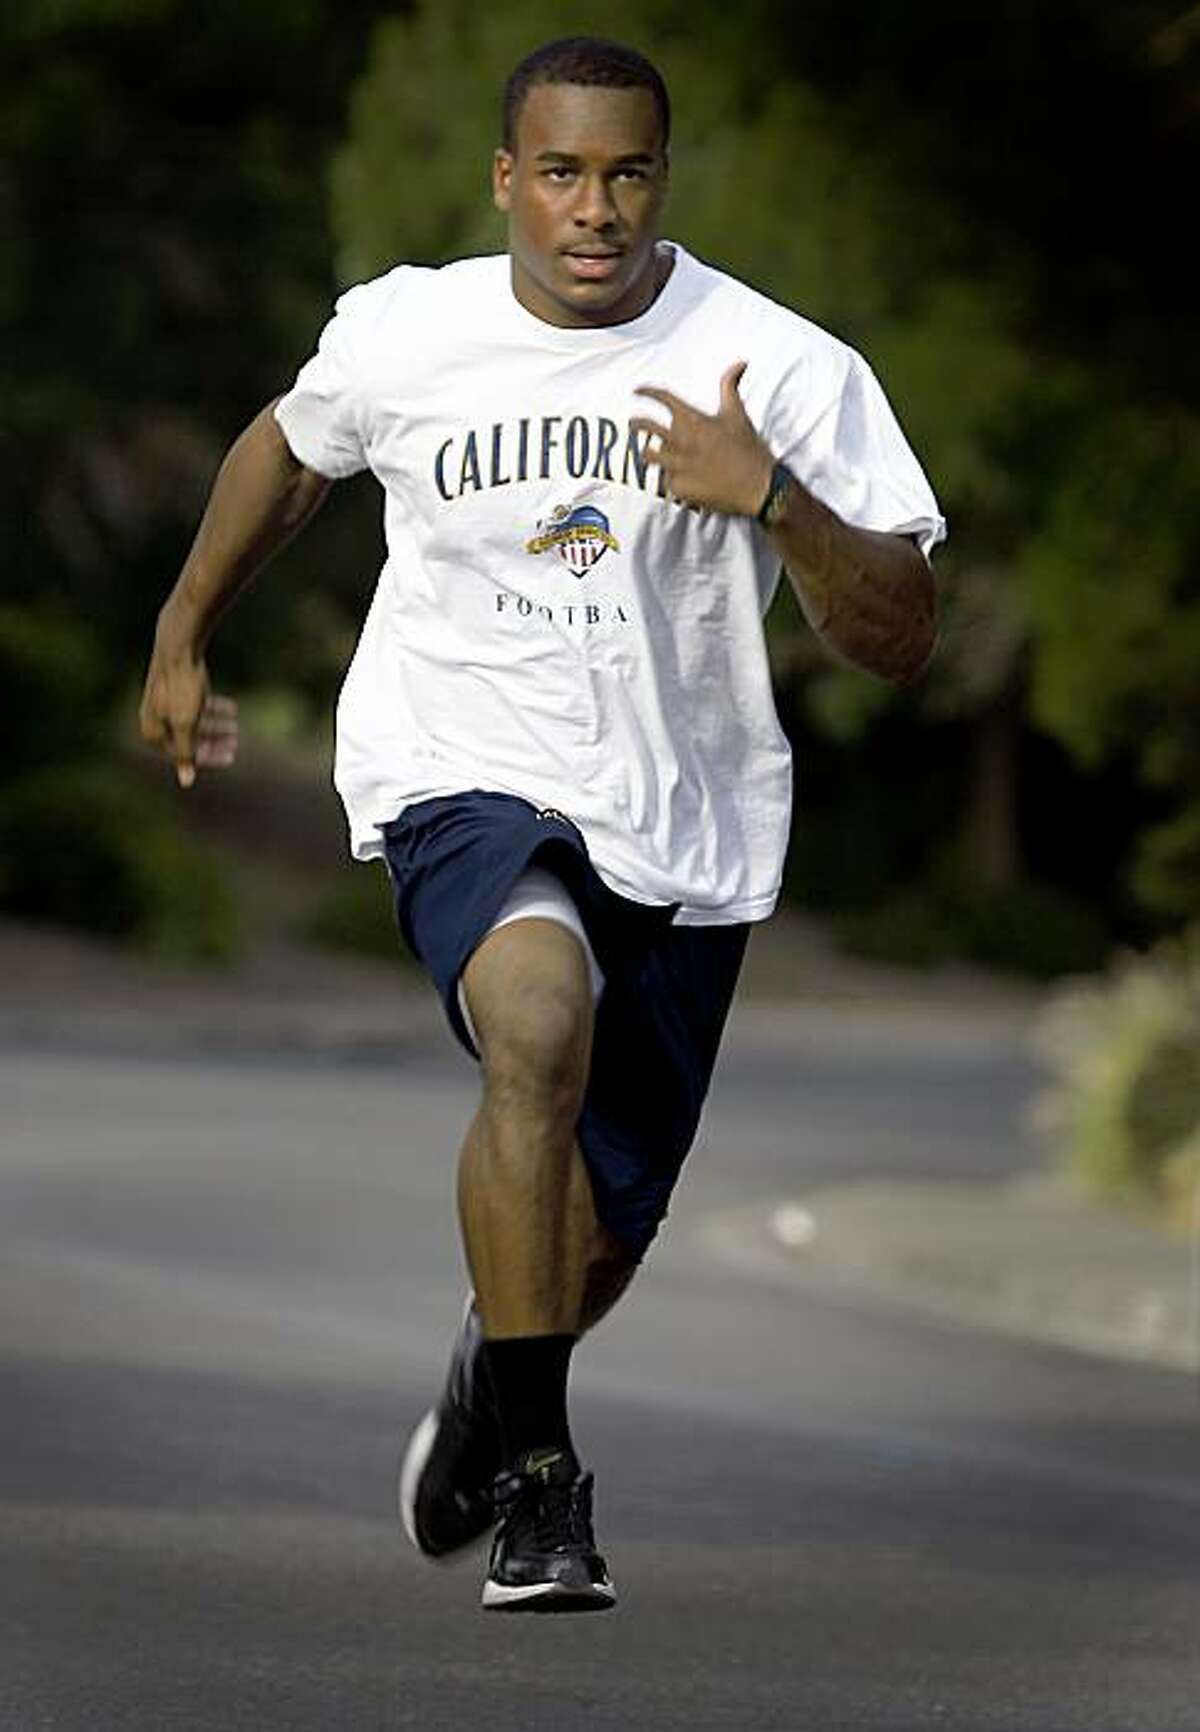 Jahvid Best sprints up a steep section of Georgia Street in Vallejo, Calif., on Wednesday, Aug. 5, 2009. The star running back for the California Golden Bears stays in shape during the off-season by running up the hill several times, two or three days a week.